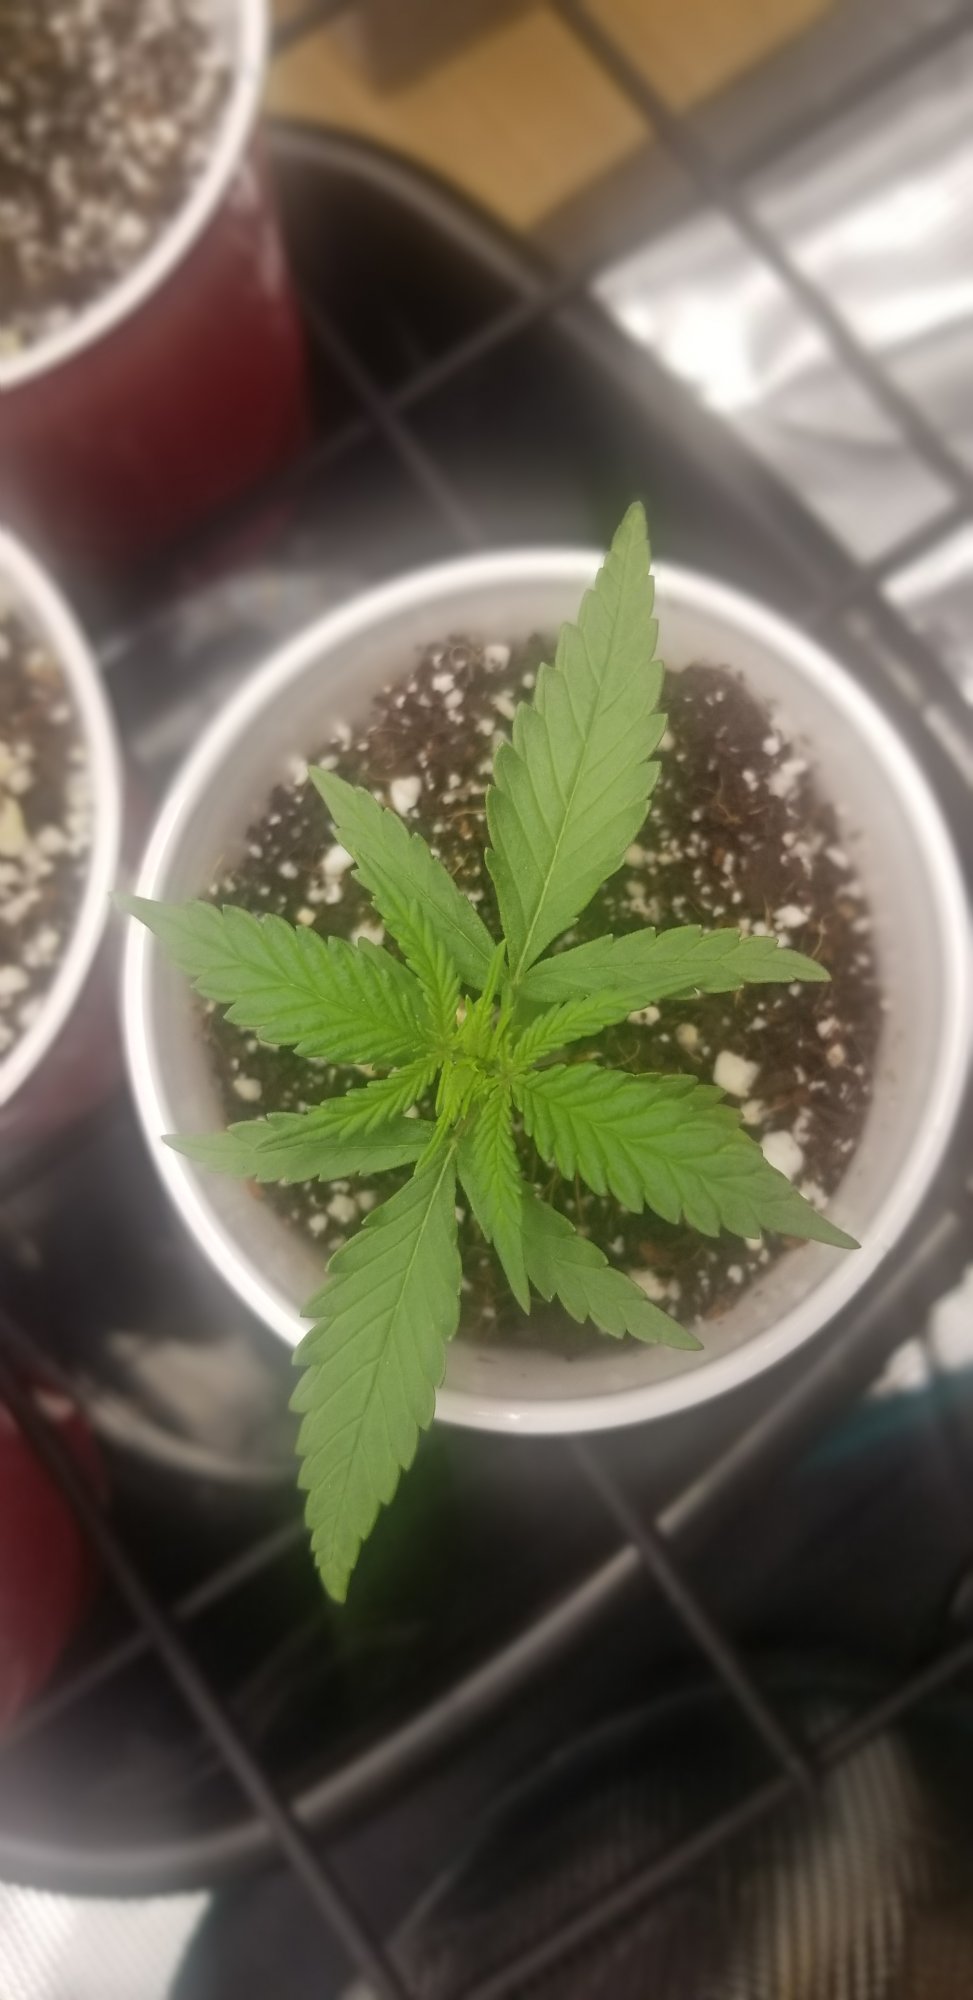 Trial error monitoring adjusting first grow coco coir daily pics and updates 11